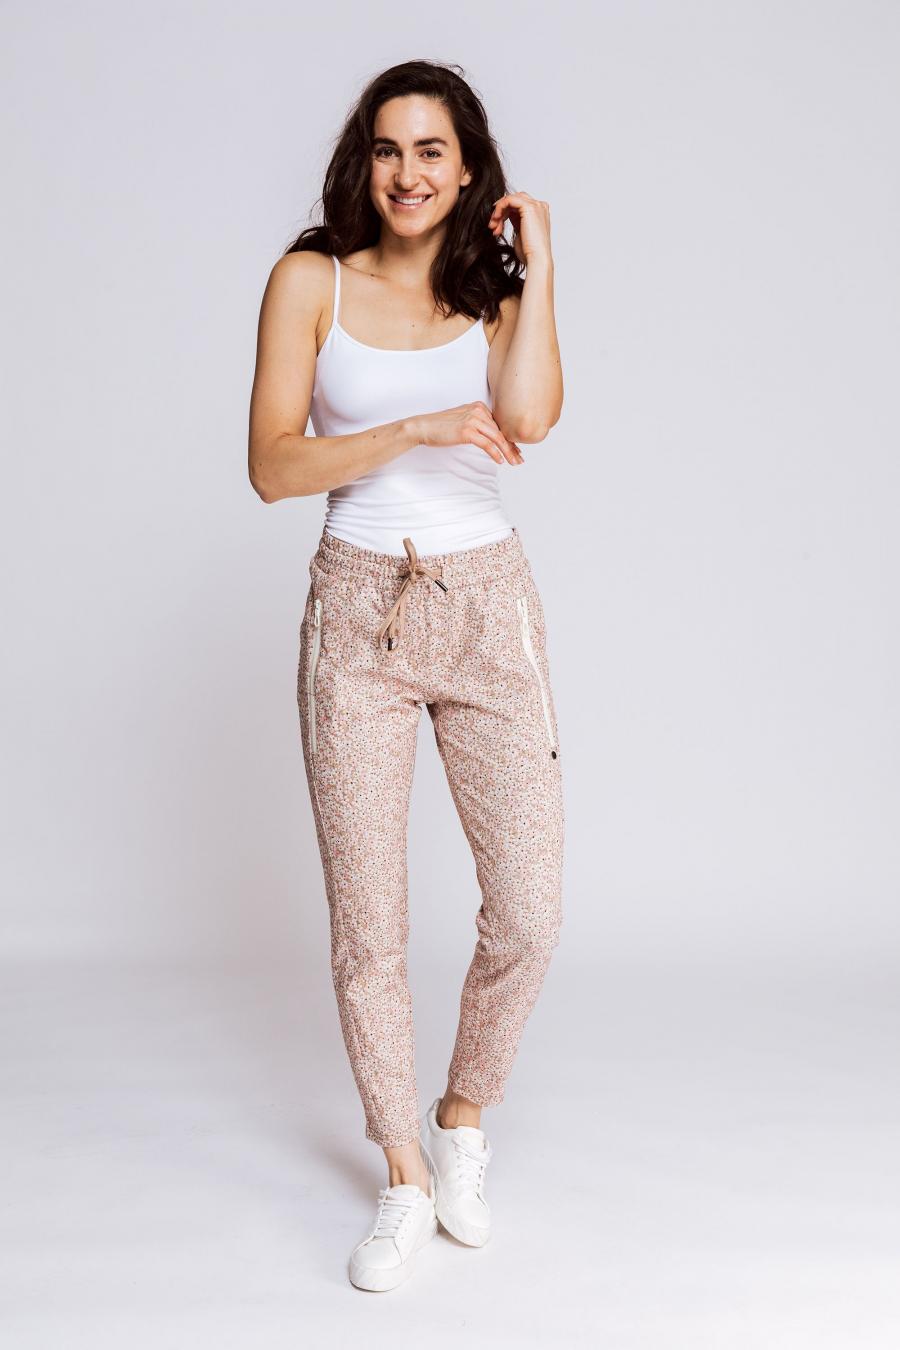 Zhrill - Chiara Casual Rose Co Black + – Pant & Tuesday